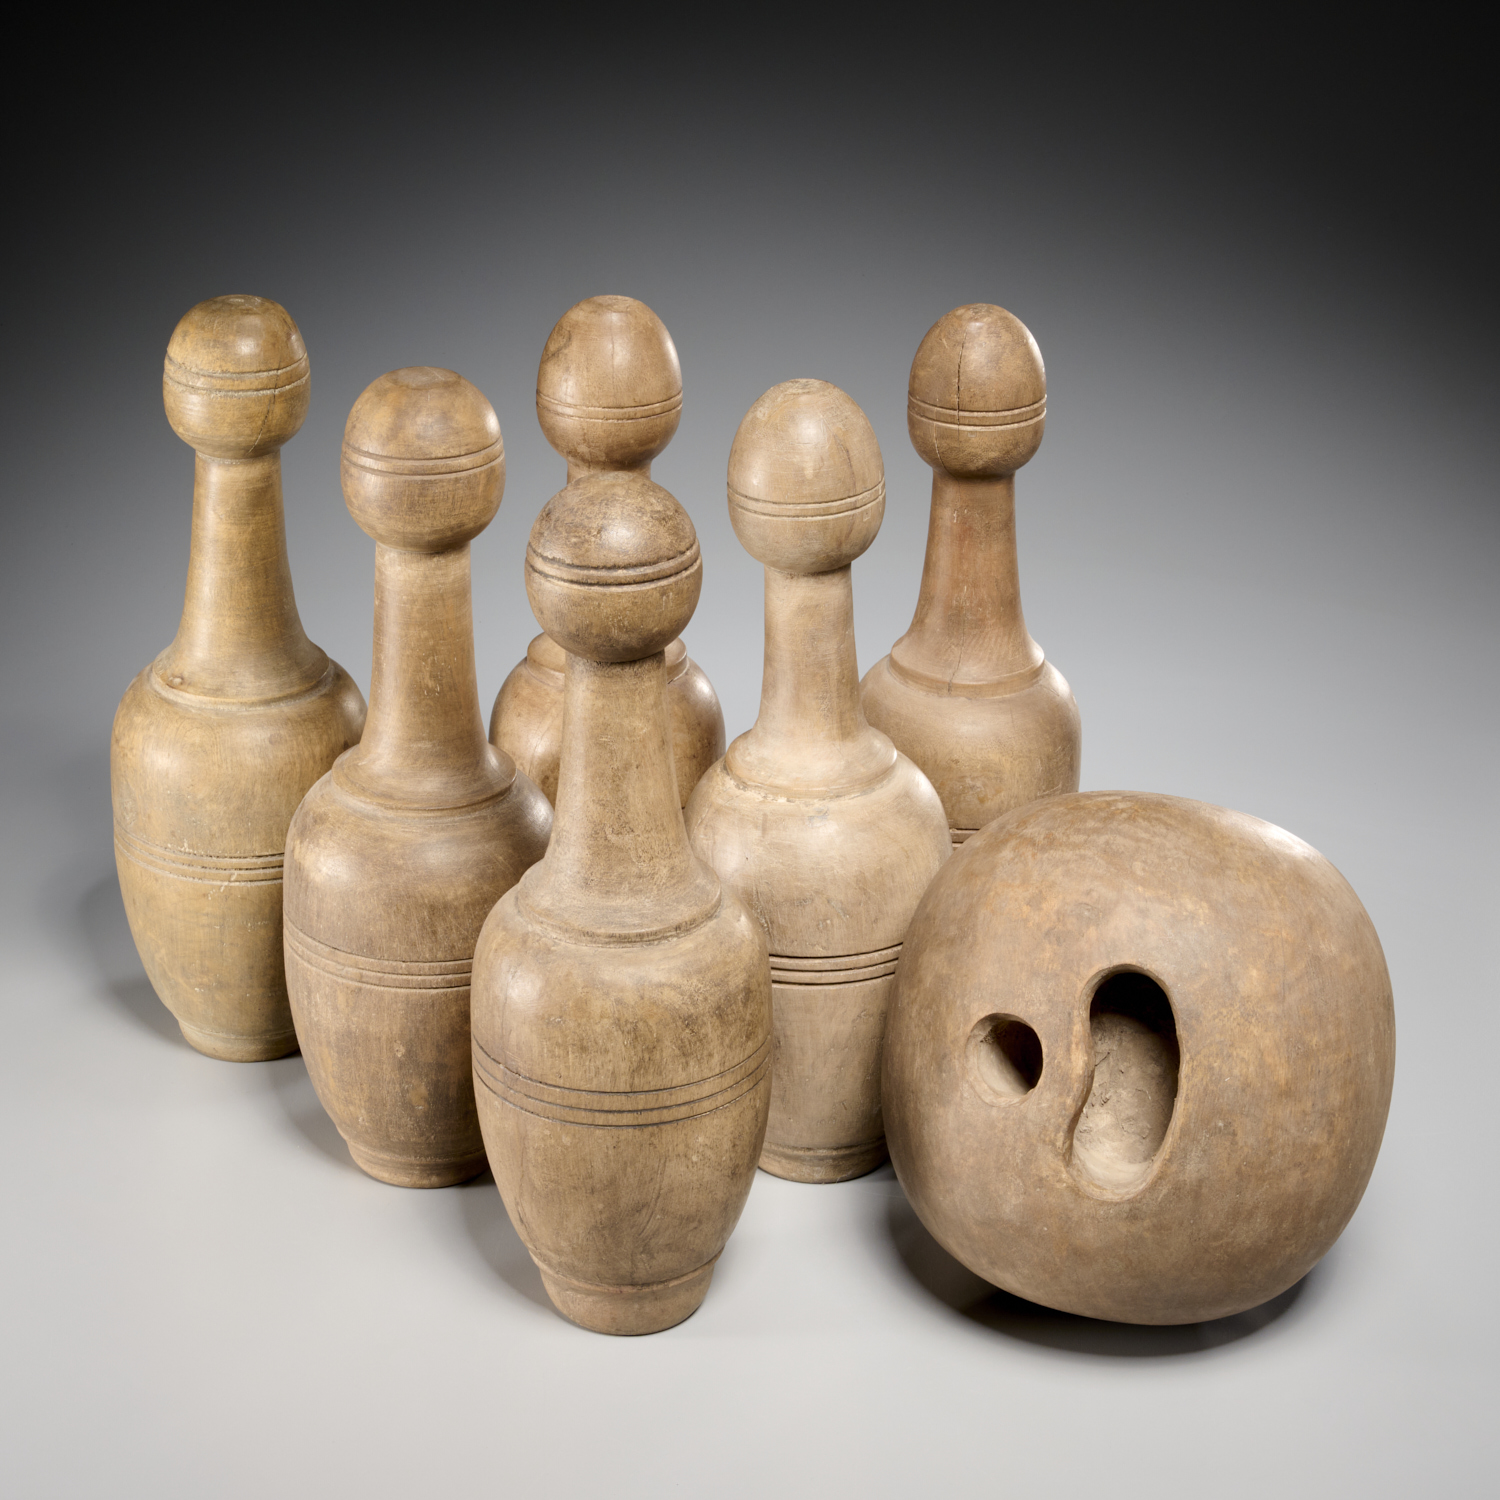 ANTIQUE WOODEN SKITTLES BOWLING